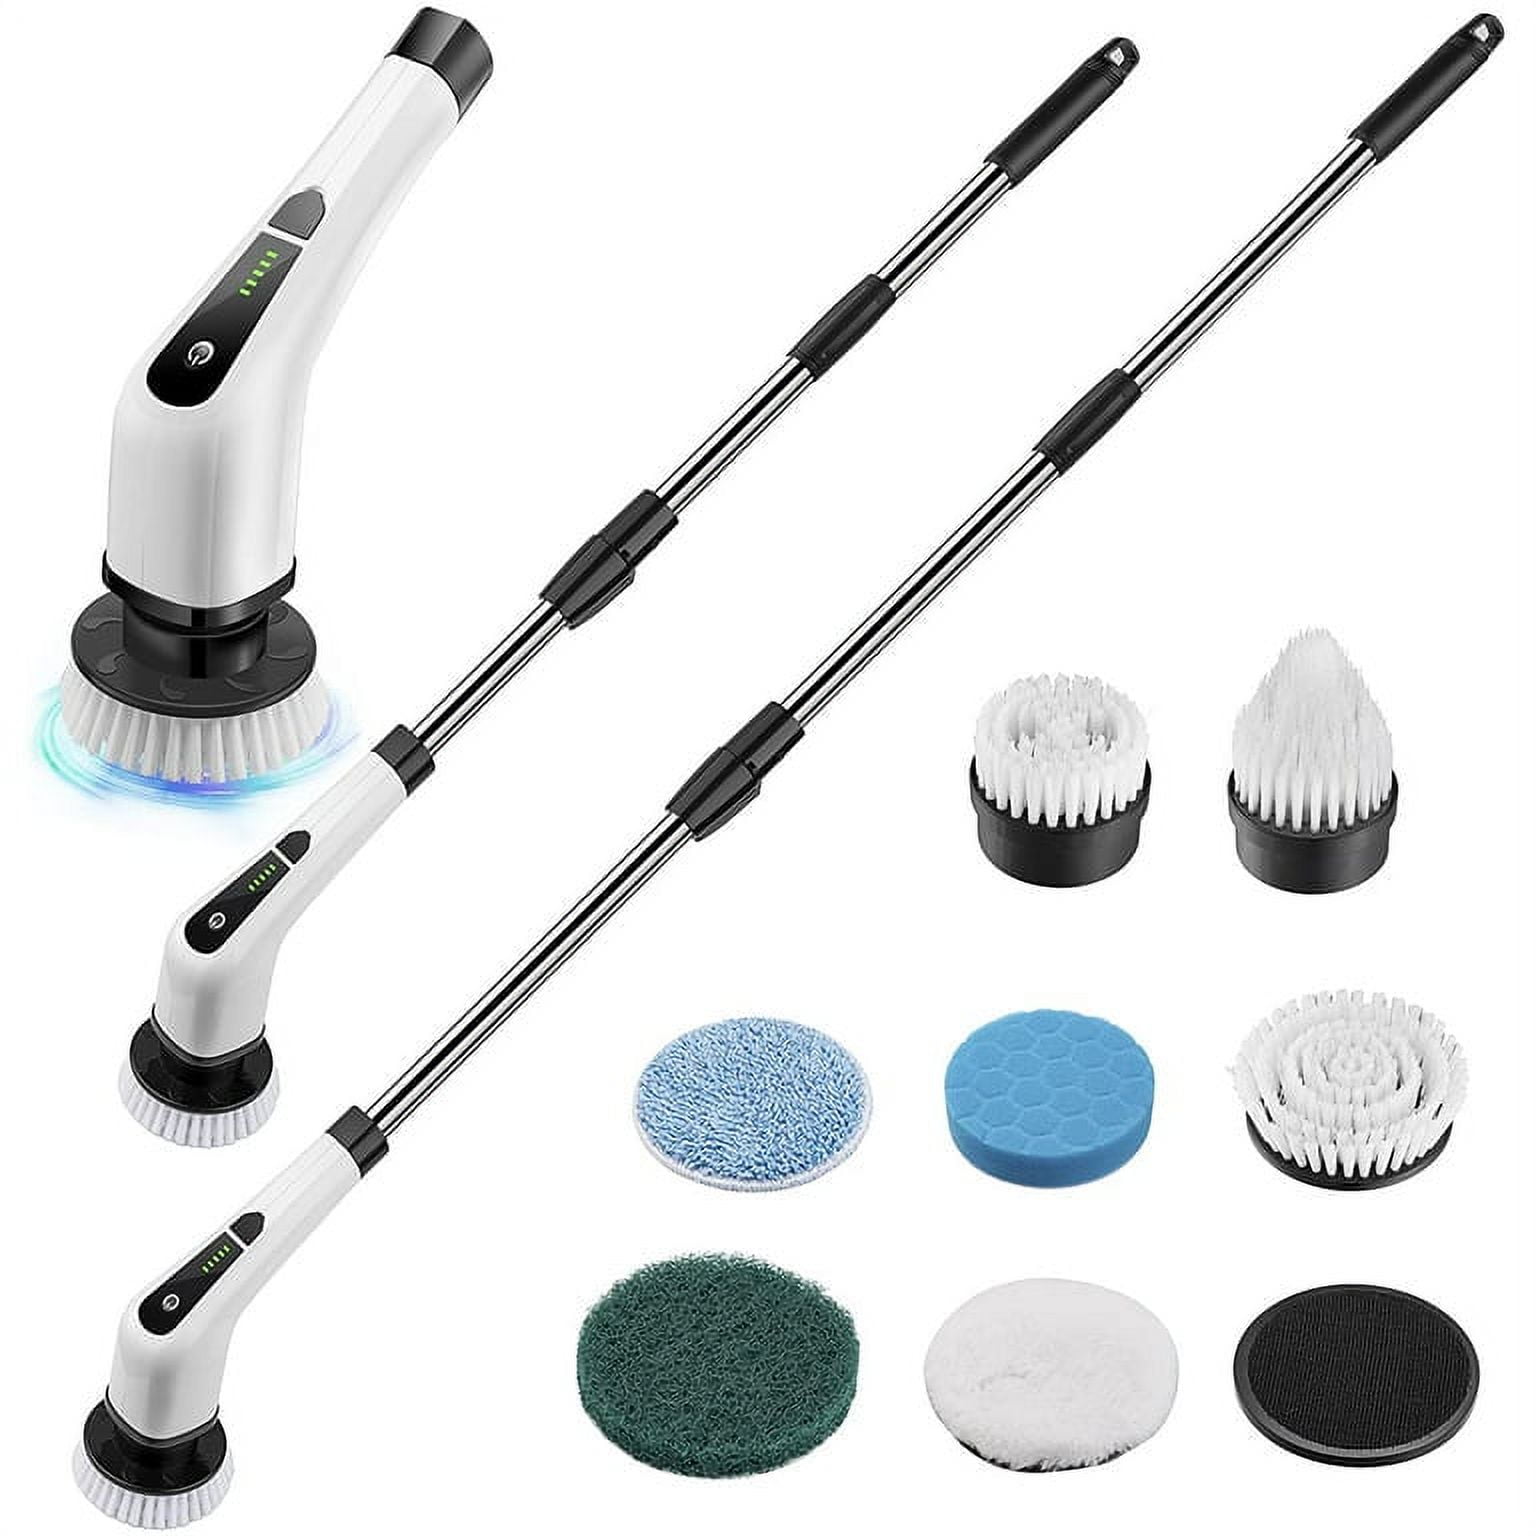 Electric Spin Scrubber - PHALANX Cordless Cleaning Brush Adjustable  Extension Arm with 4 Replaceable Brush Heads Household Electric Power Shower  Scrubber for Bathroom,Tile Floor - Coupon Codes, Promo Codes, Daily Deals,  Save